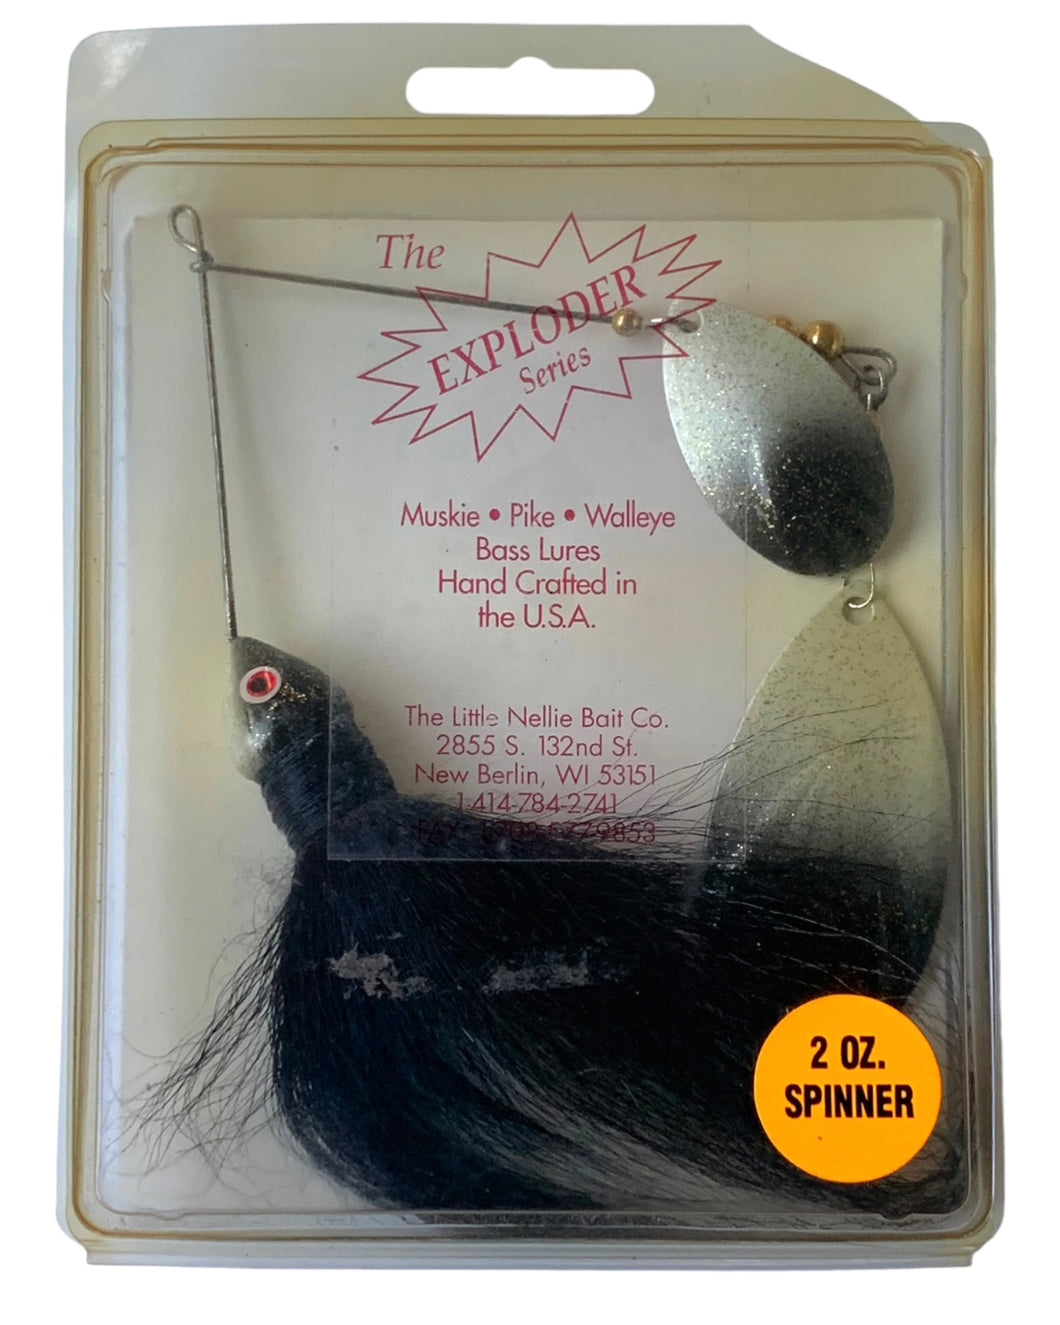 2 oz SPINNER From The Little Nellie Bait Company of New Berlin, Wisconsin in BLACK